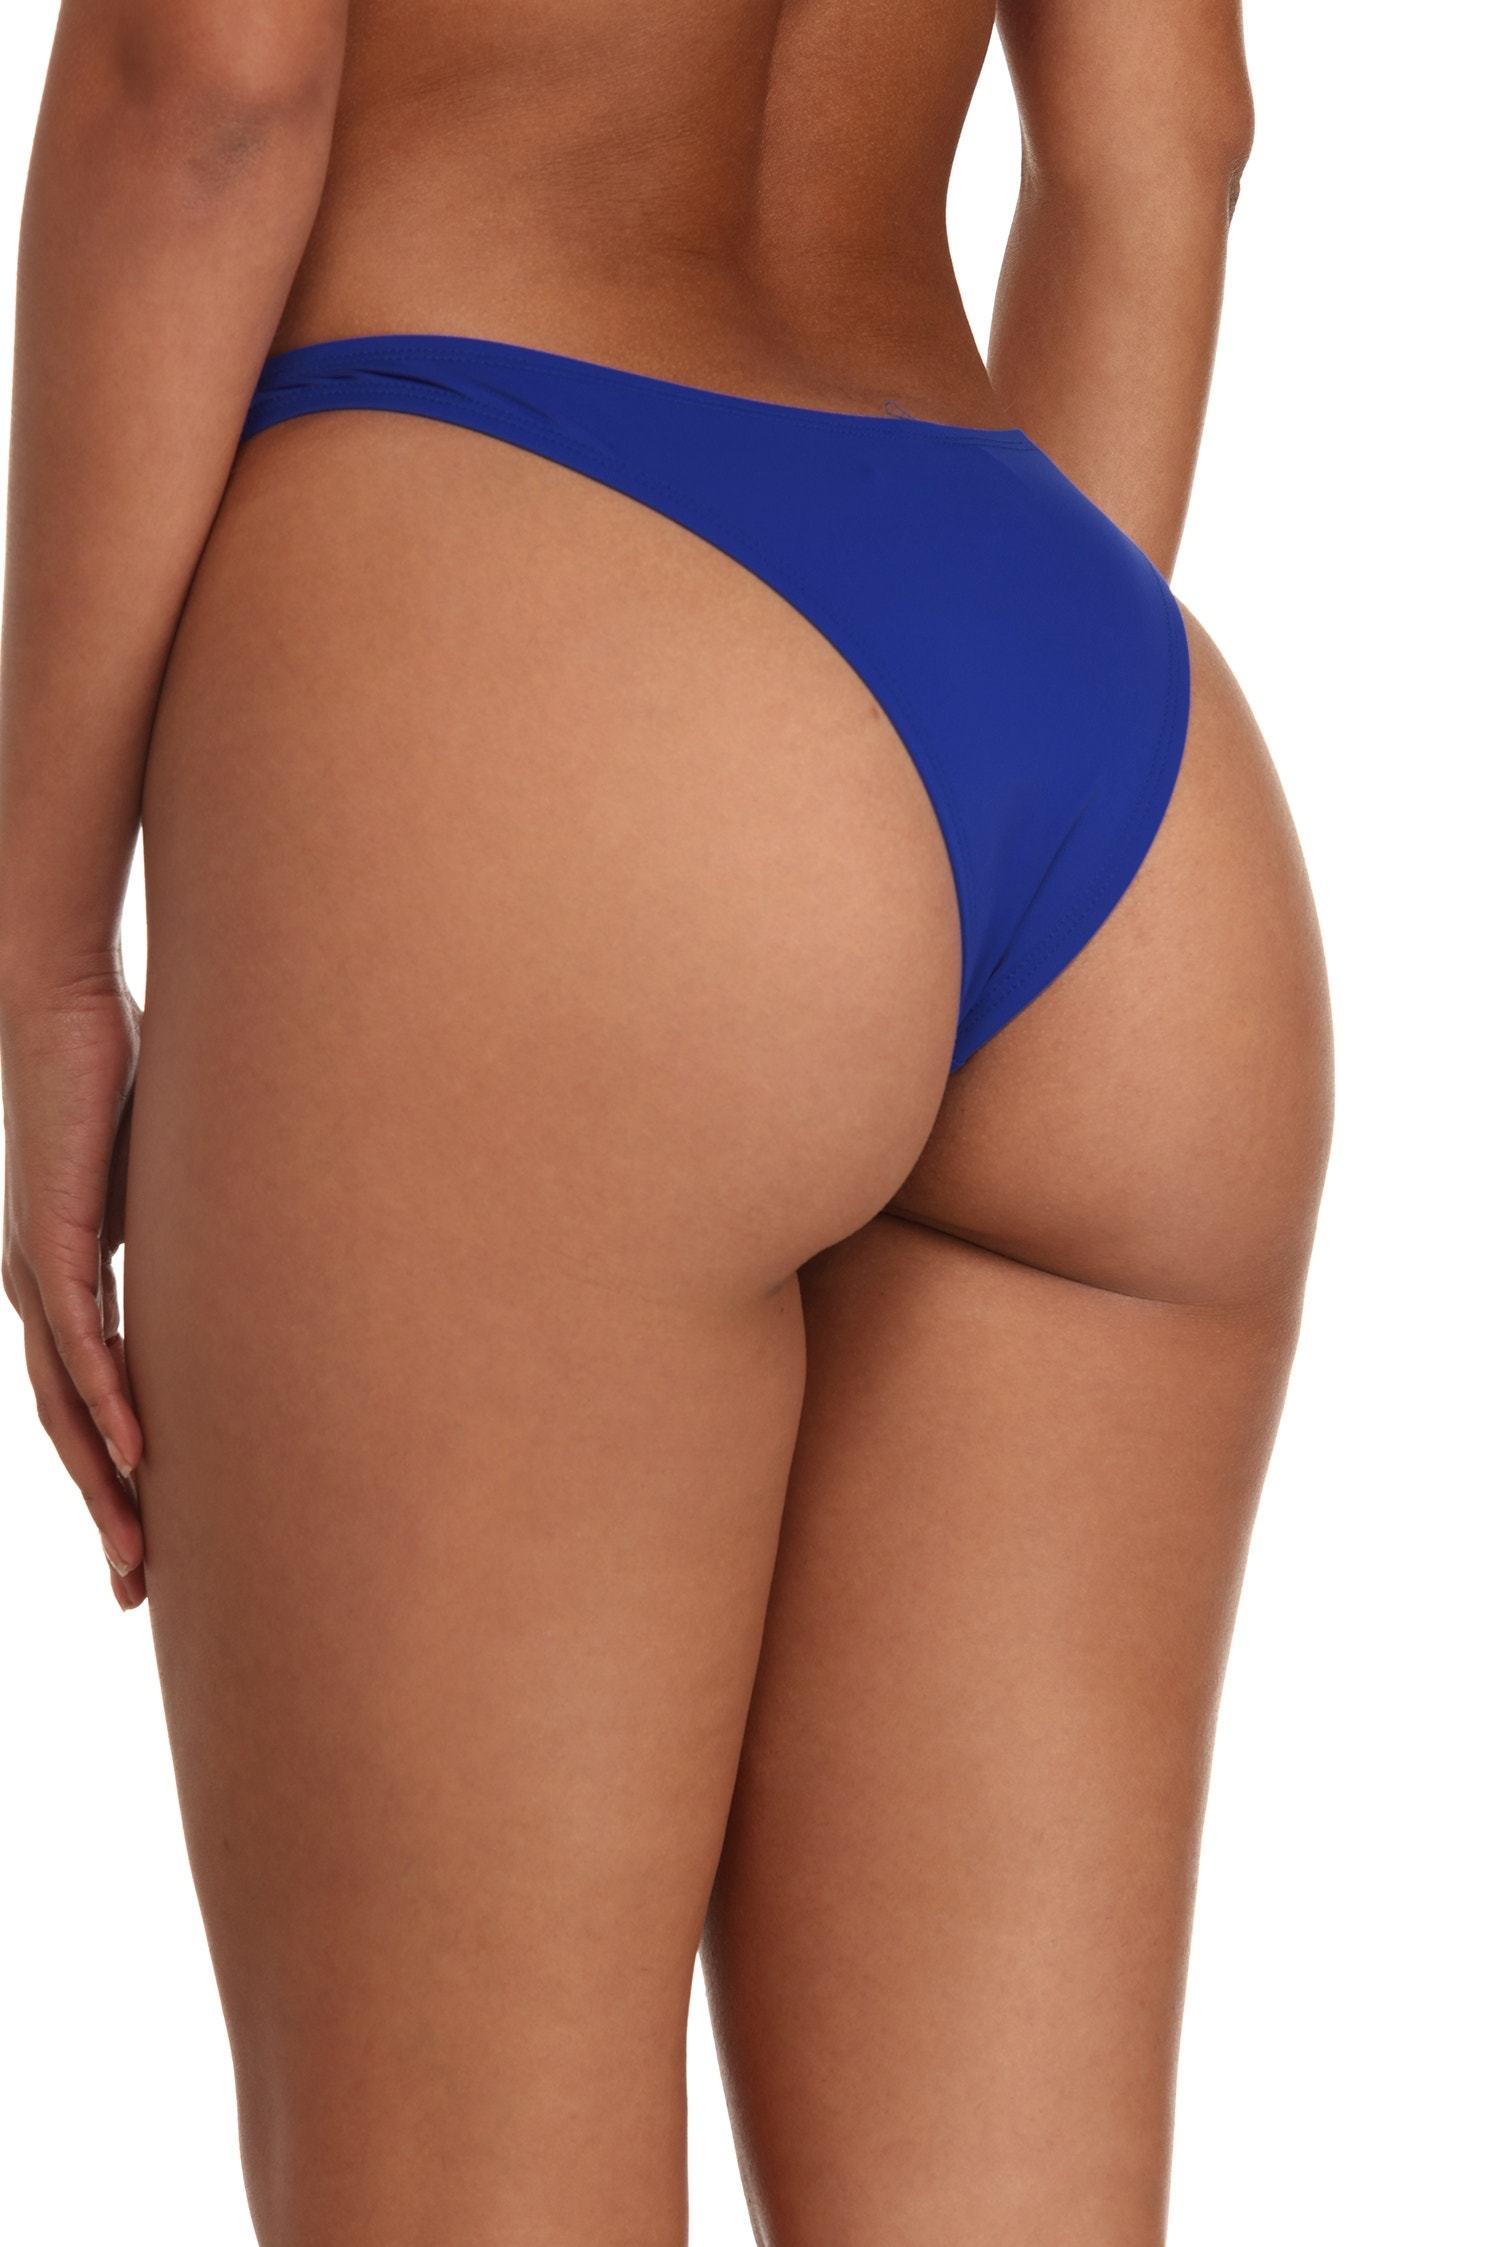 Cut To The Chase Swim Bottom - Lady Occasions